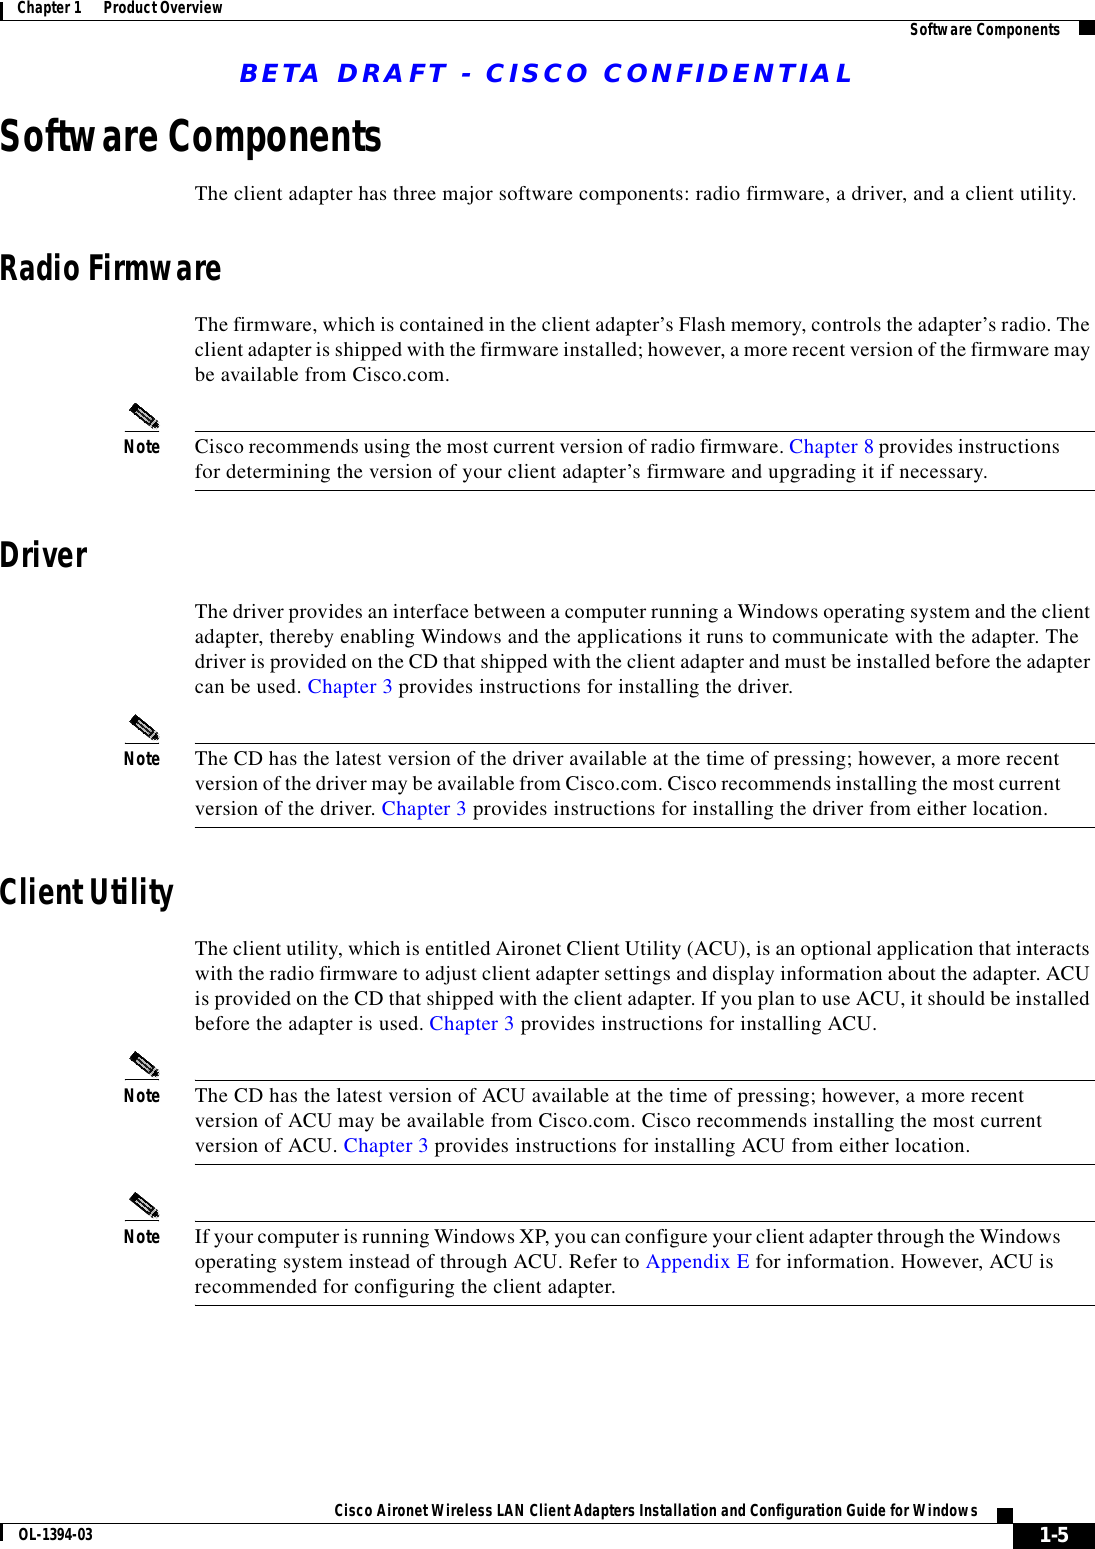 BETA DRAFT - CISCO CONFIDENTIAL1-5Cisco Aironet Wireless LAN Client Adapters Installation and Configuration Guide for WindowsOL-1394-03Chapter 1      Product Overview Software ComponentsSoftware ComponentsThe client adapter has three major software components: radio firmware, a driver, and a client utility.Radio FirmwareThe firmware, which is contained in the client adapter’s Flash memory, controls the adapter’s radio. The client adapter is shipped with the firmware installed; however, a more recent version of the firmware may be available from Cisco.com.Note Cisco recommends using the most current version of radio firmware. Chapter 8 provides instructions for determining the version of your client adapter’s firmware and upgrading it if necessary.DriverThe driver provides an interface between a computer running a Windows operating system and the client adapter, thereby enabling Windows and the applications it runs to communicate with the adapter. The driver is provided on the CD that shipped with the client adapter and must be installed before the adapter can be used. Chapter 3 provides instructions for installing the driver.Note The CD has the latest version of the driver available at the time of pressing; however, a more recent version of the driver may be available from Cisco.com. Cisco recommends installing the most current version of the driver. Chapter 3 provides instructions for installing the driver from either location.Client UtilityThe client utility, which is entitled Aironet Client Utility (ACU), is an optional application that interacts with the radio firmware to adjust client adapter settings and display information about the adapter. ACU is provided on the CD that shipped with the client adapter. If you plan to use ACU, it should be installed before the adapter is used. Chapter 3 provides instructions for installing ACU.Note The CD has the latest version of ACU available at the time of pressing; however, a more recent version of ACU may be available from Cisco.com. Cisco recommends installing the most current version of ACU. Chapter 3 provides instructions for installing ACU from either location.Note If your computer is running Windows XP, you can configure your client adapter through the Windows operating system instead of through ACU. Refer to Appendix E for information. However, ACU is recommended for configuring the client adapter. 